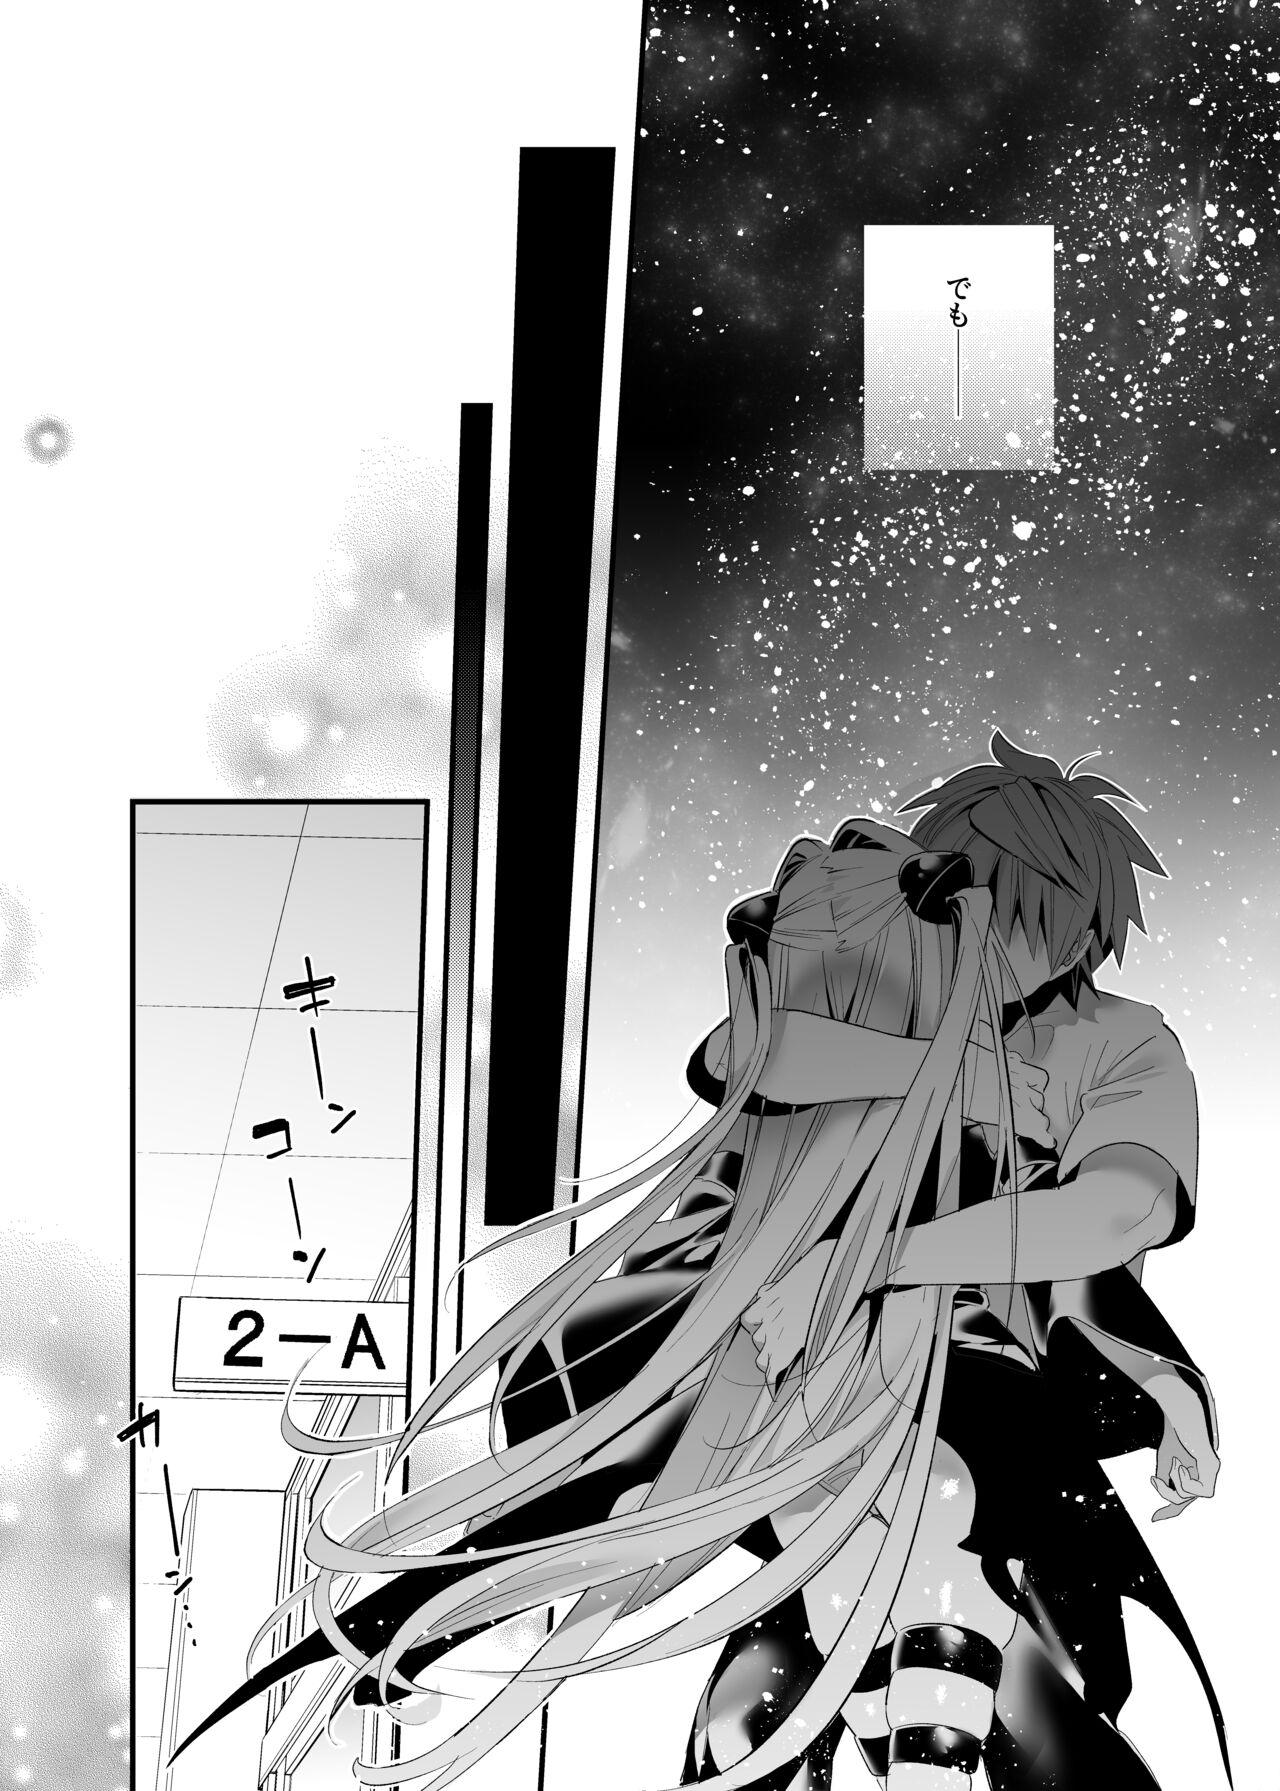 Pounded はじめて名前で。 - To love ru Gilf - Page 4